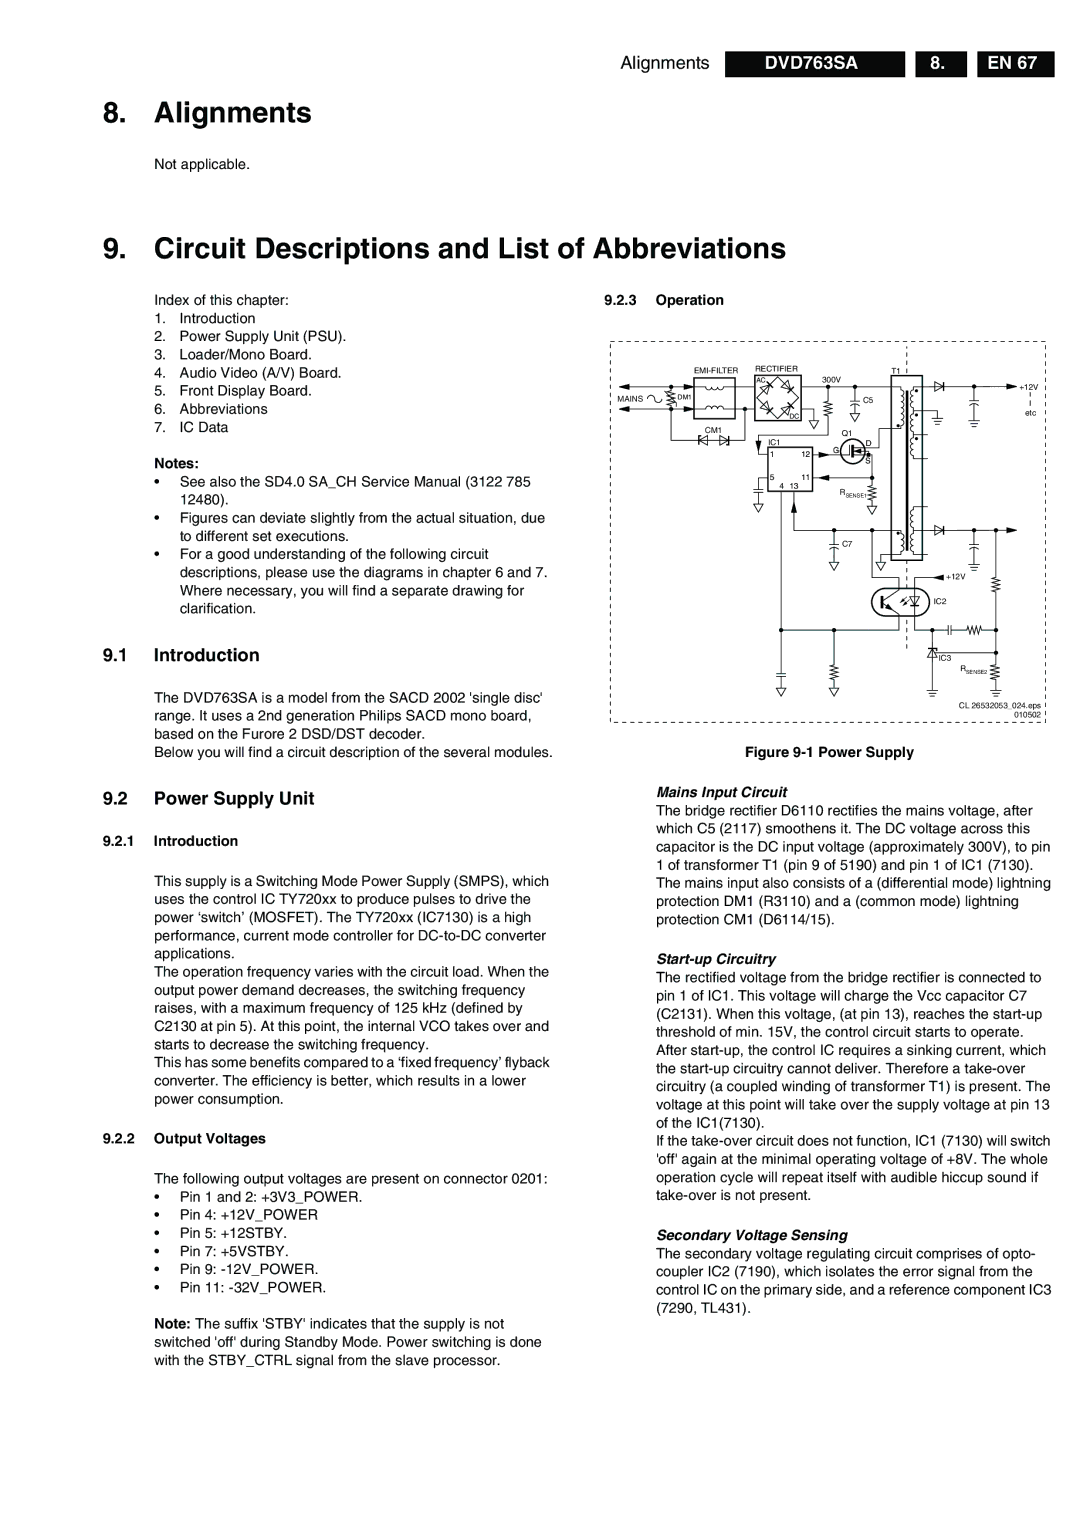 Philips DVD763SA/021 manual Alignments, Circuit Descriptions and List of Abbreviations, Introduction, Power Supply Unit 